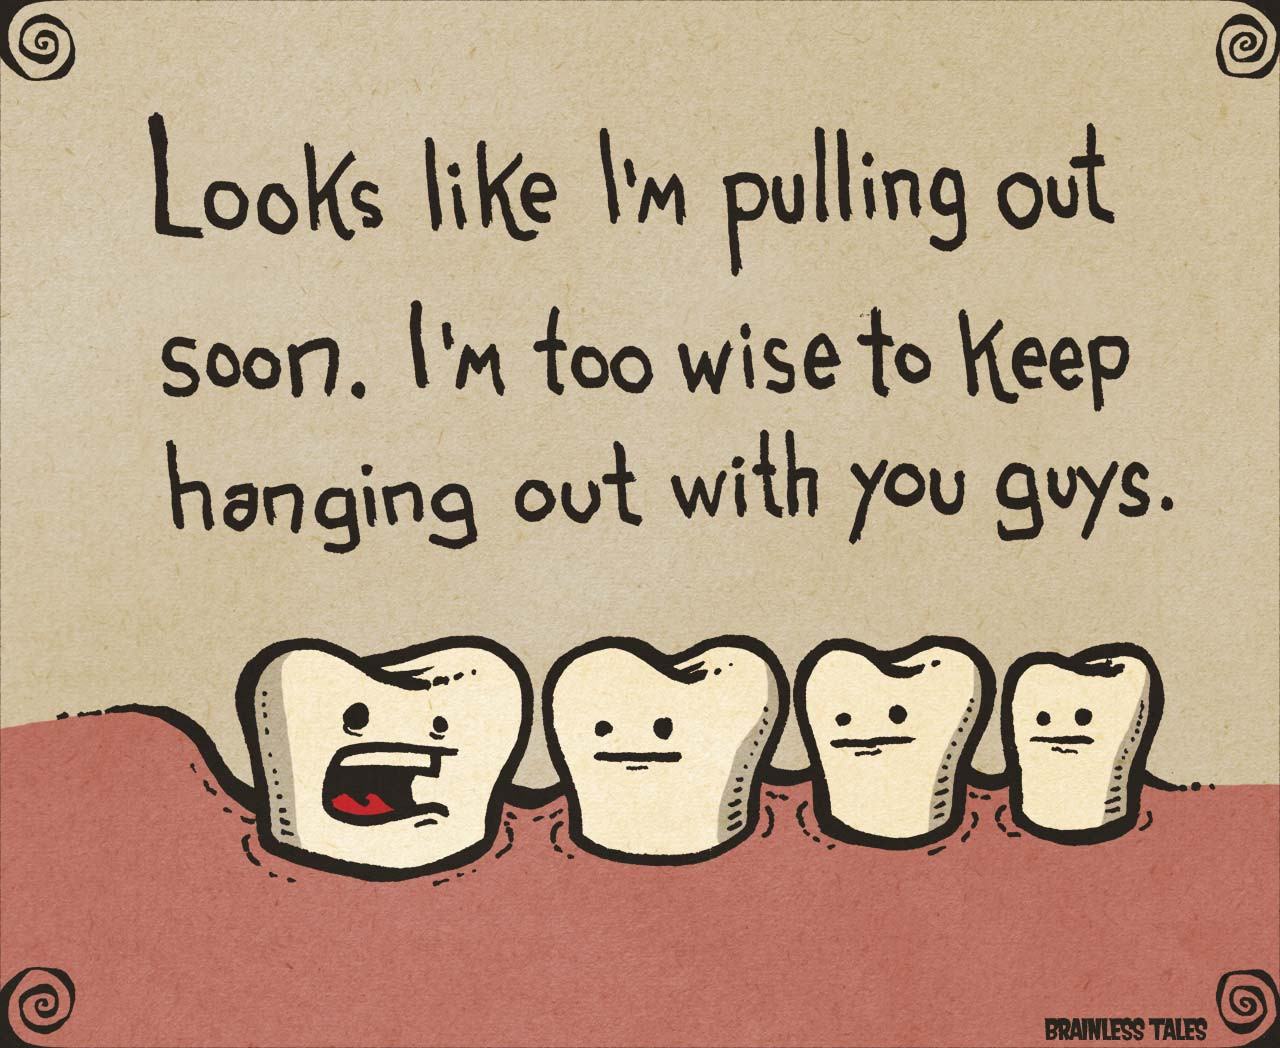 Funny Wisdom Teeth Quotes
 Wisdom Gained Trough Wisdom Tooth Extraction